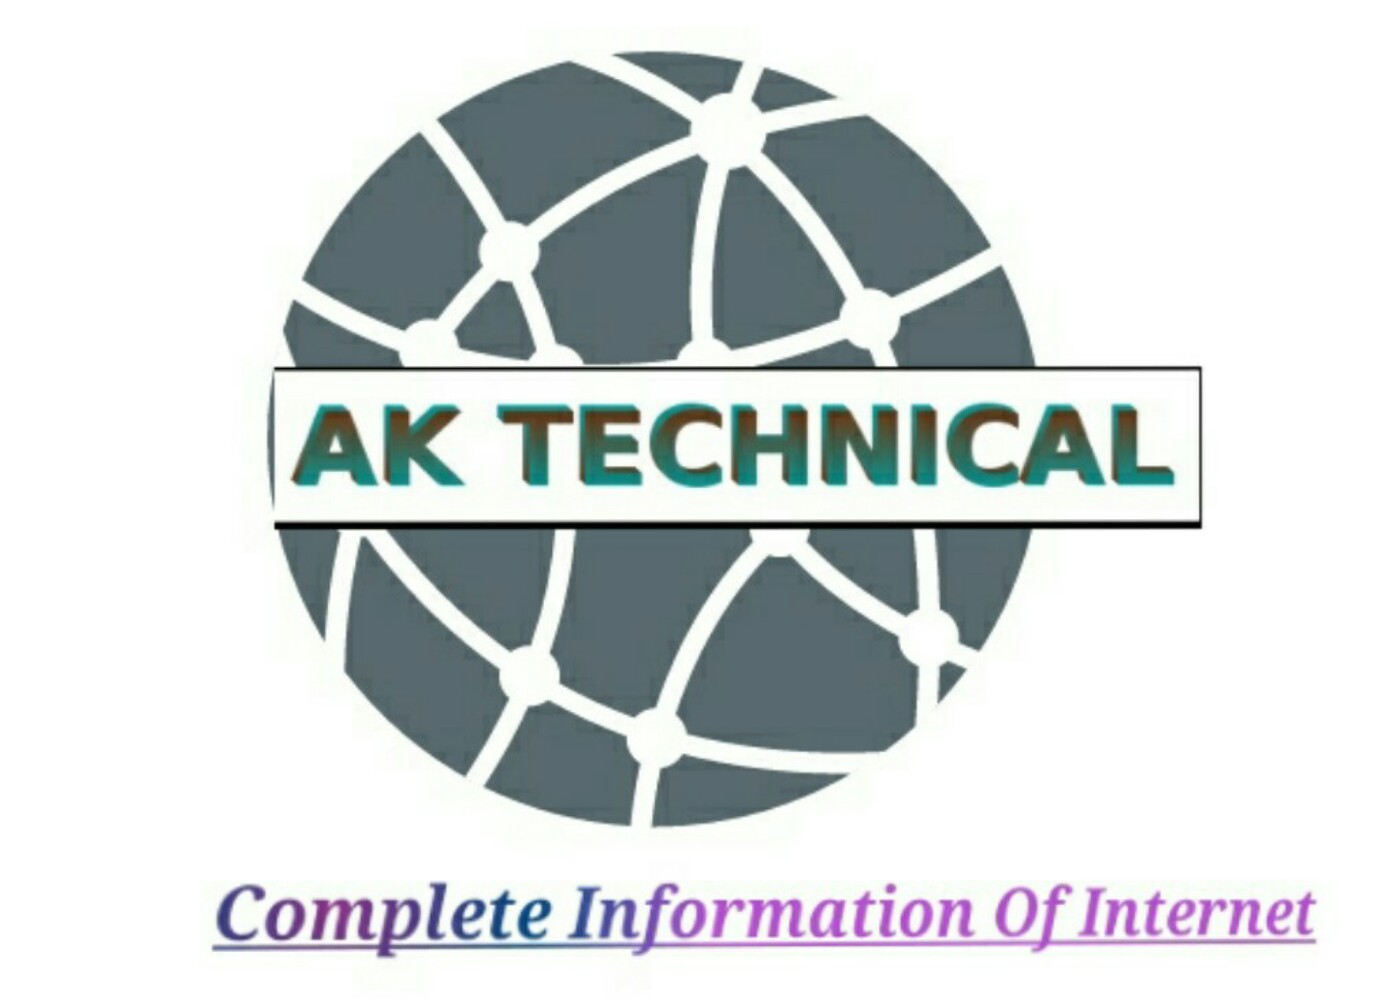 AK TECHNICAL - Complete Information Of Internet